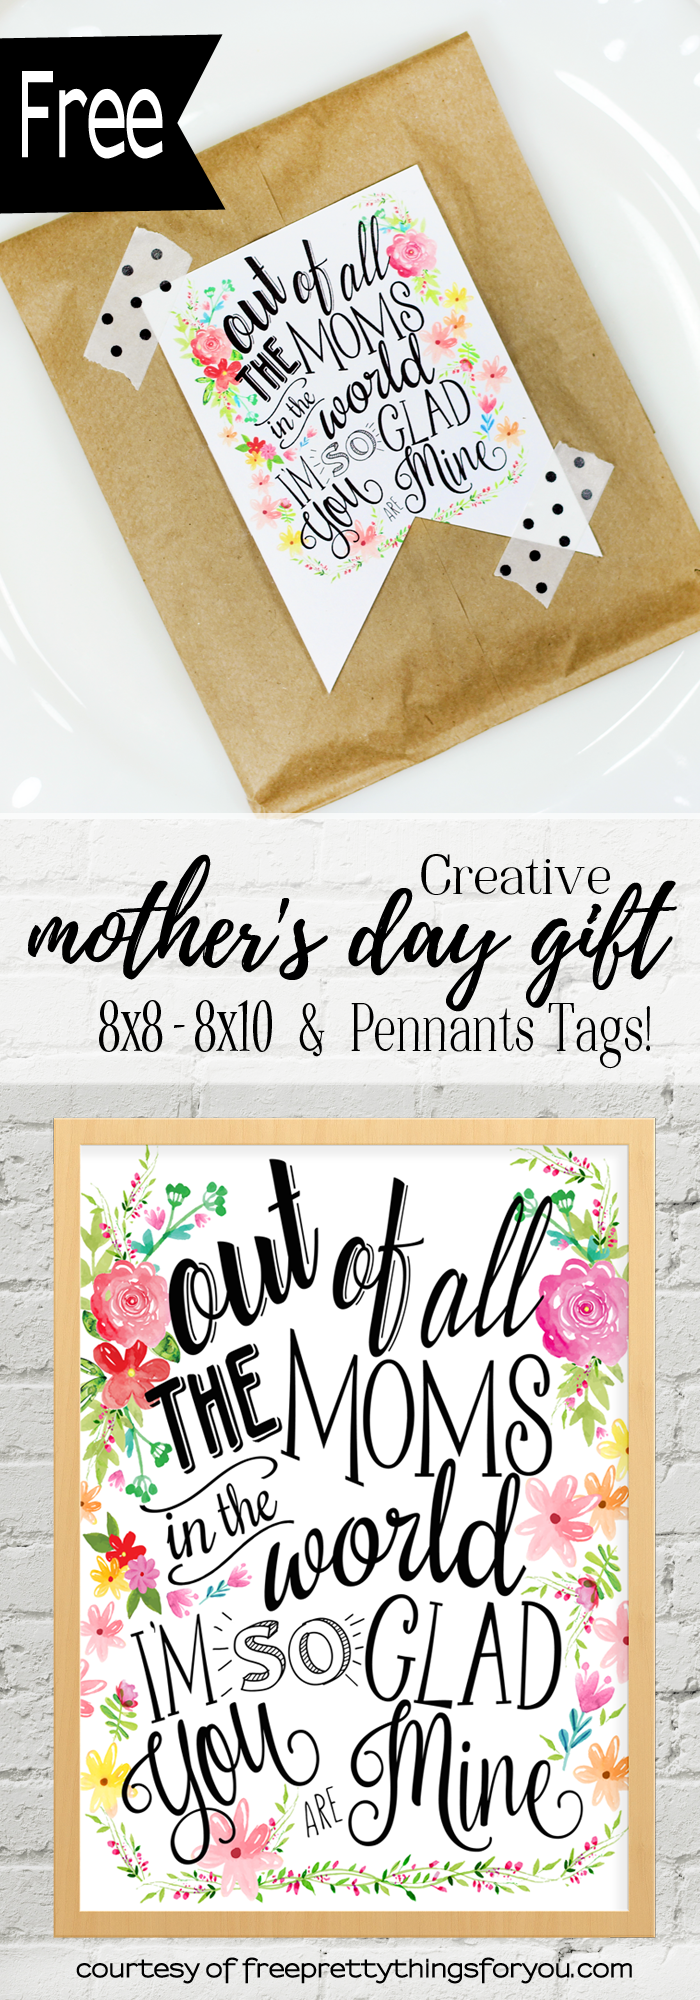 http://thecottagemarket.com/wp-content/uploads/2016/04/creative-mothers-day-gifts-Free-printable-FPTFY-Pintower2.png